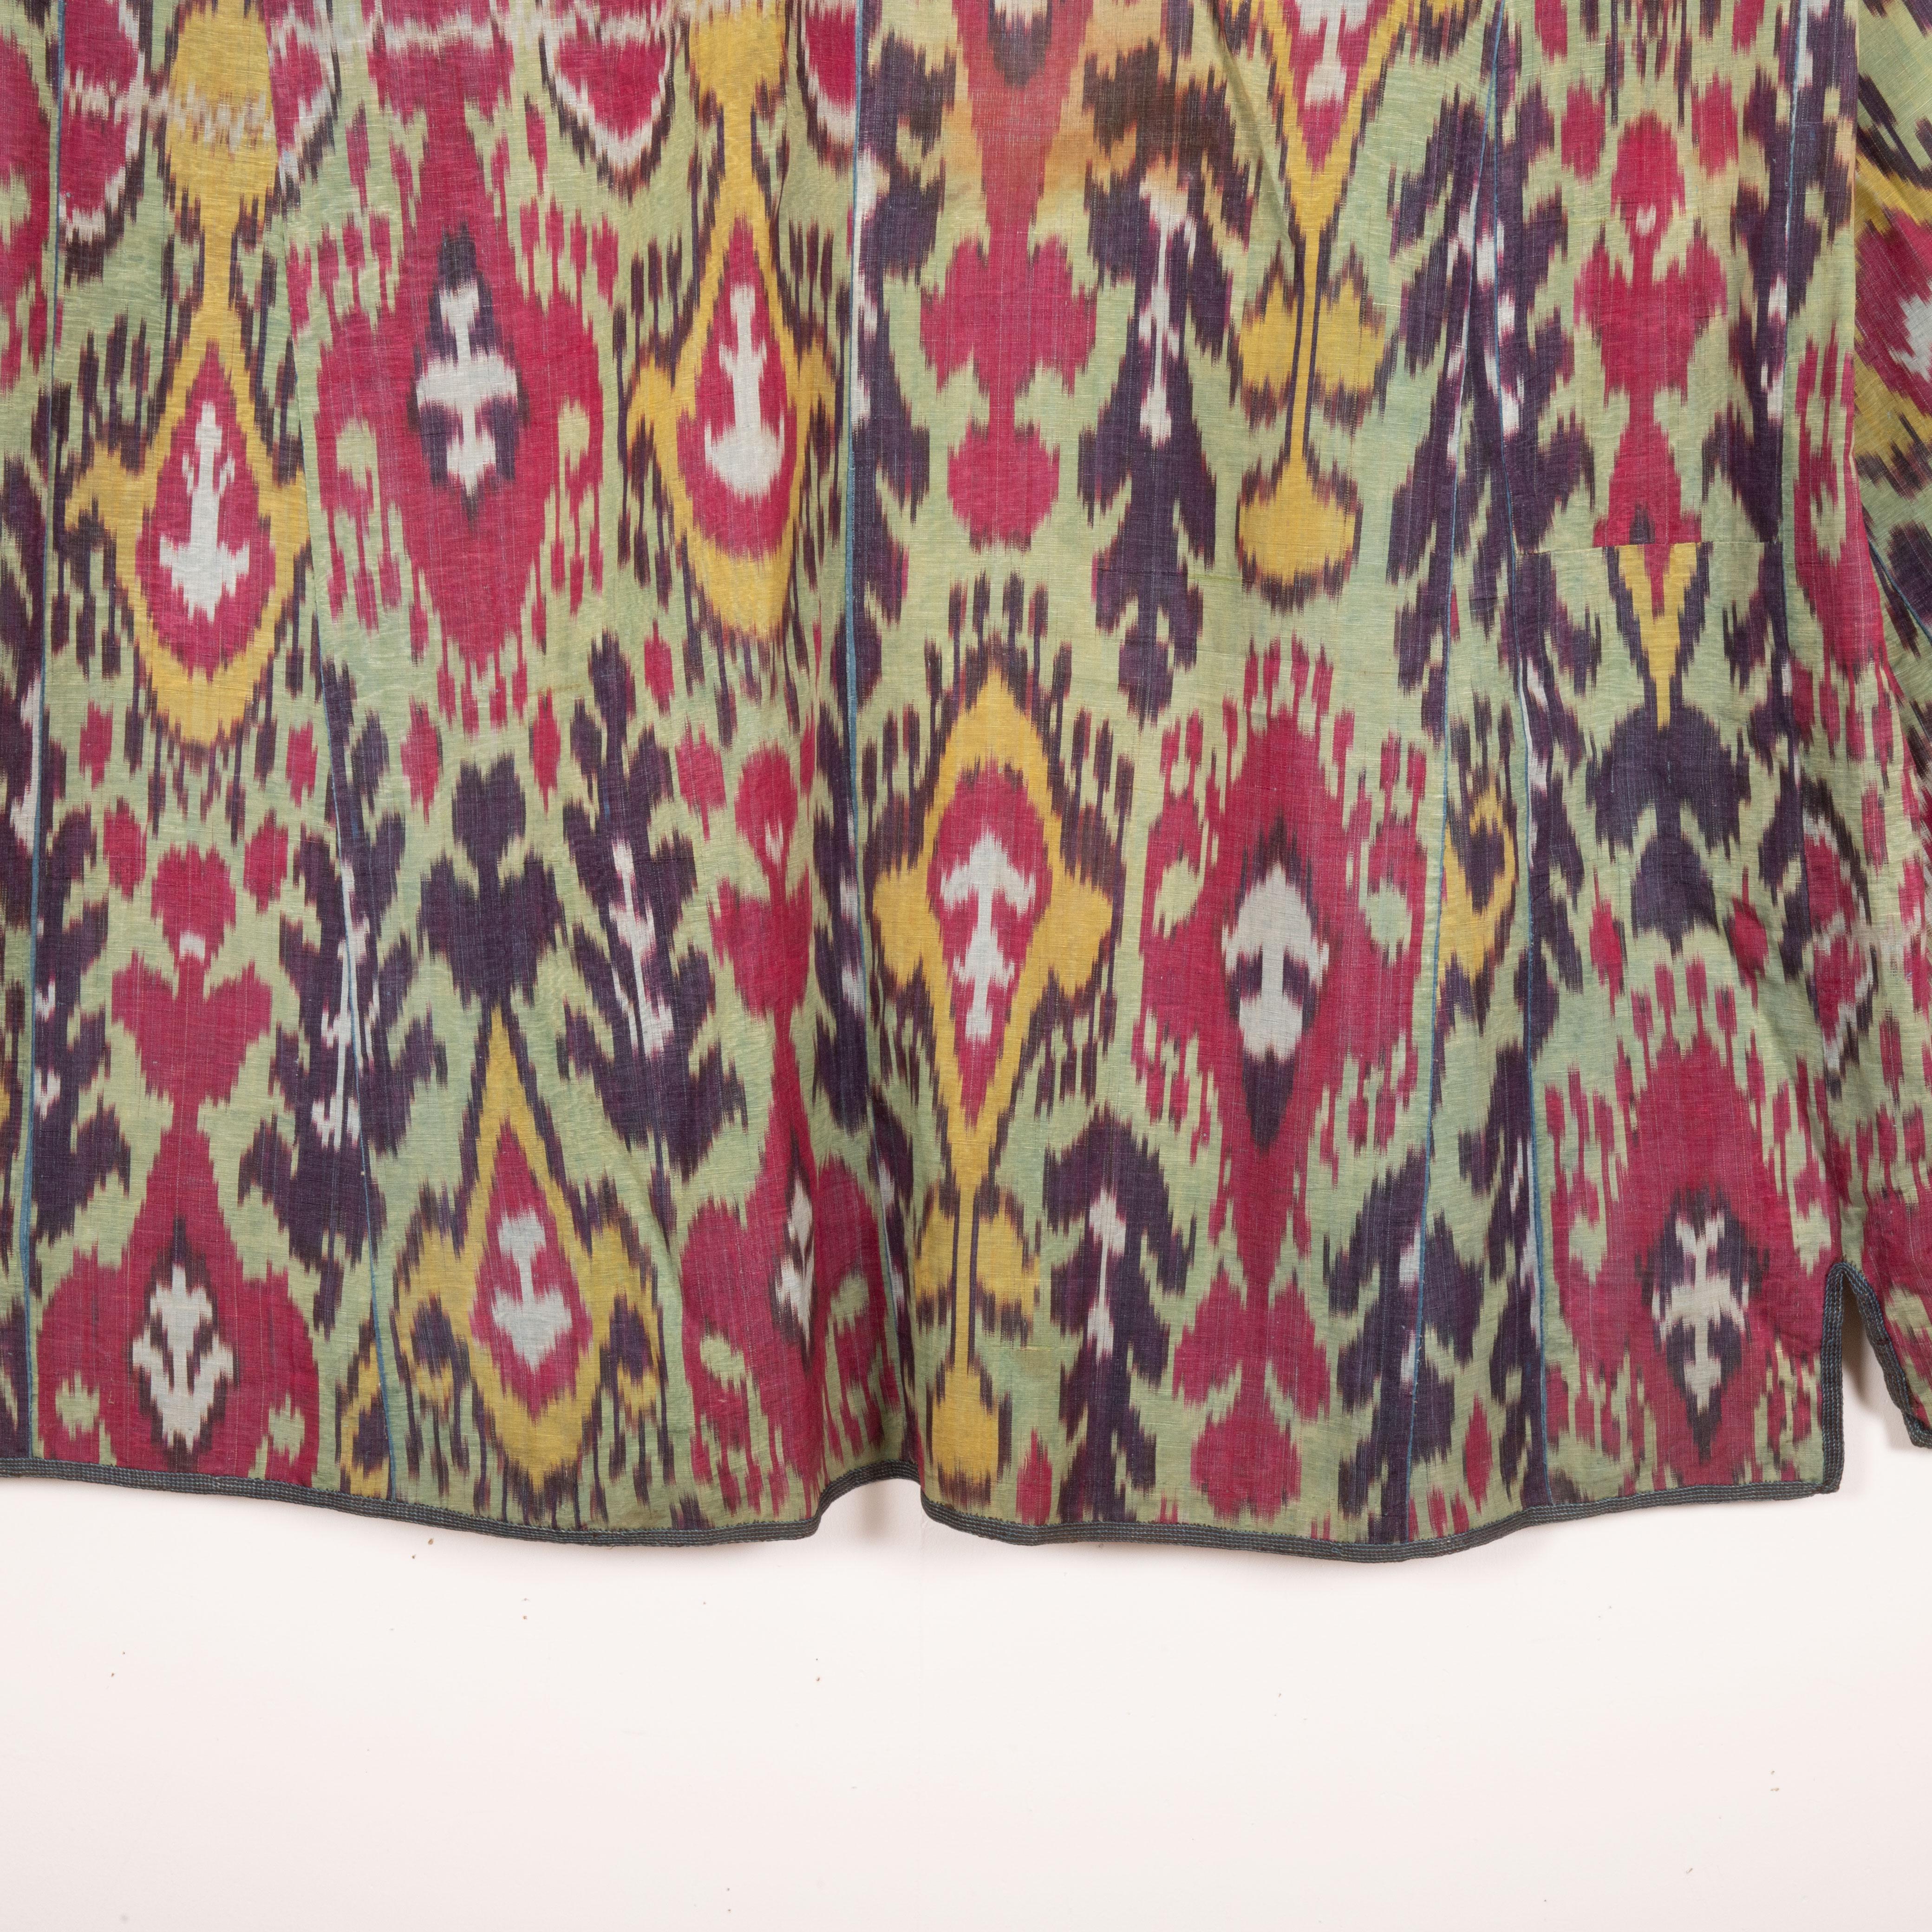 Cotton Antique Ikat Chapan with a Good Mix of Roller Printed Lining, 19th Century